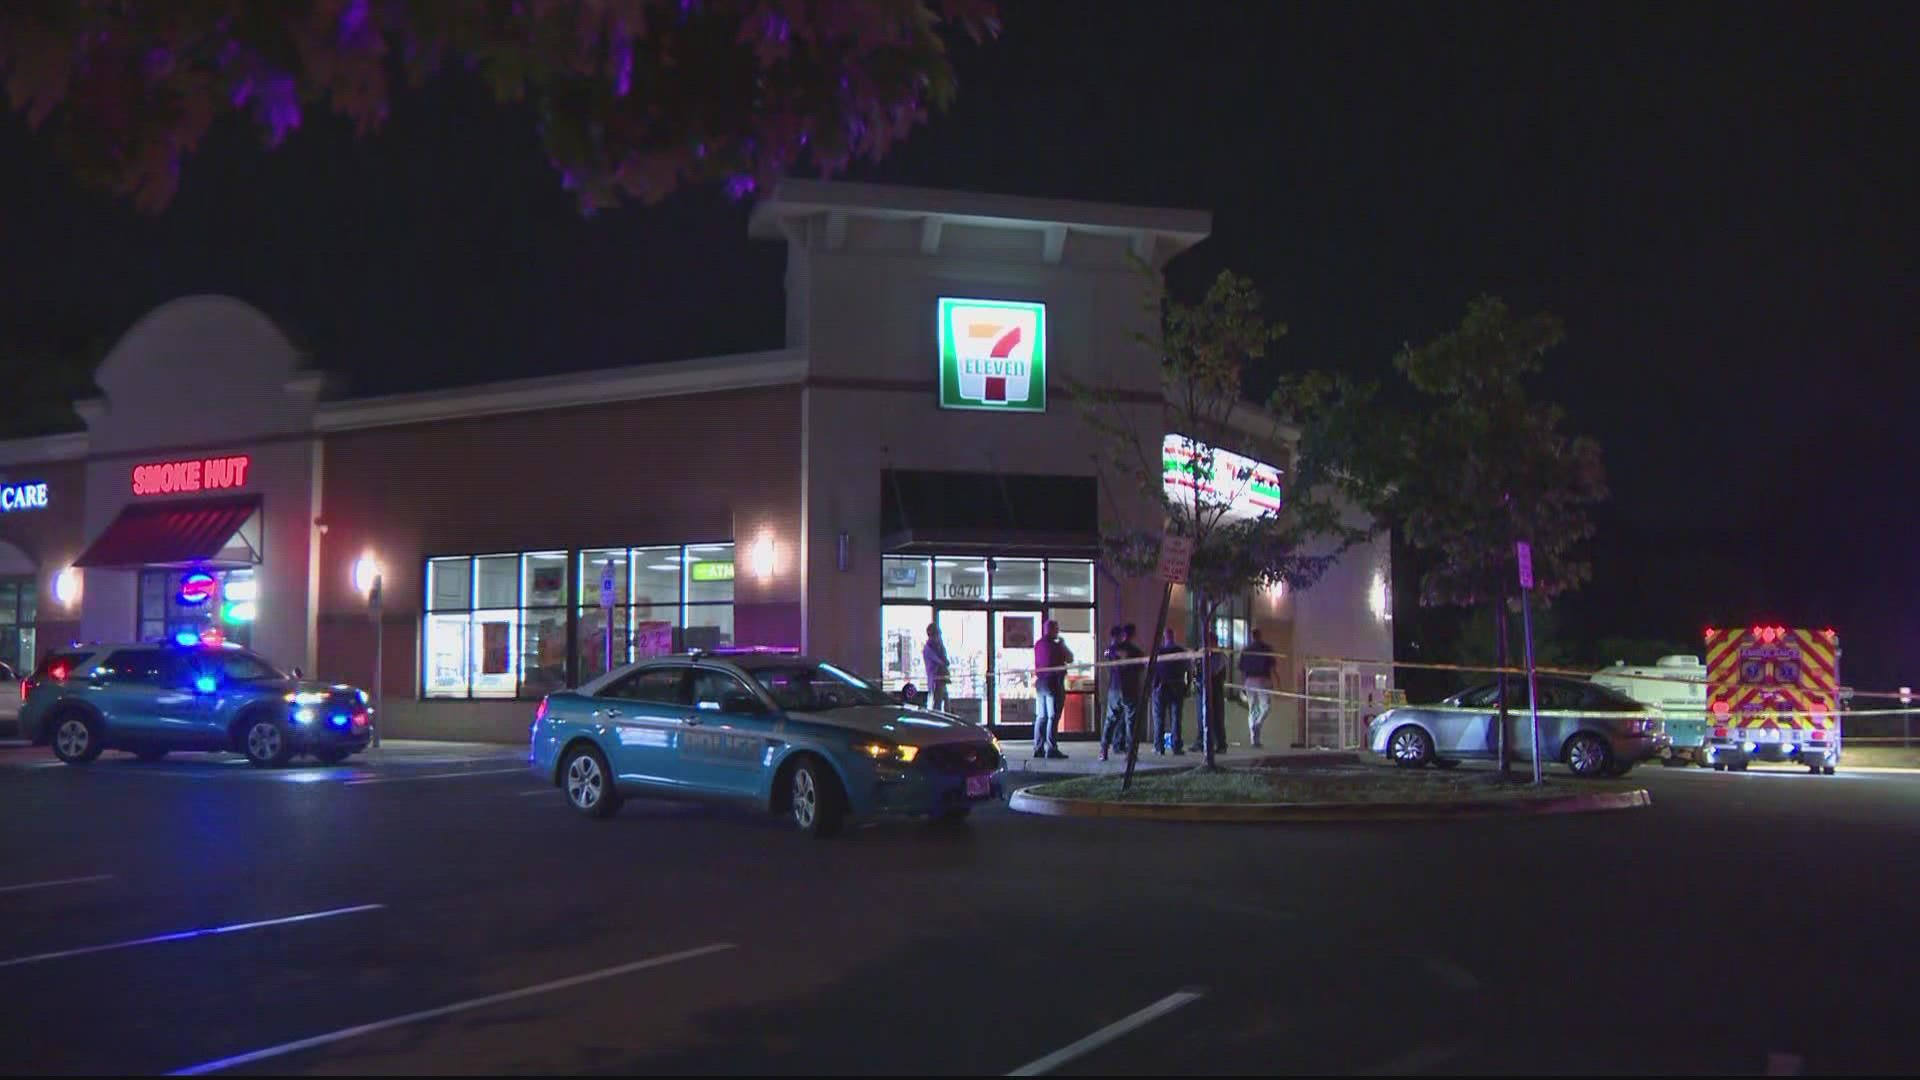 A 25-year-old man is dead, and another in hospital, after a shooting near a 7-Eleven in Manassas Friday night.